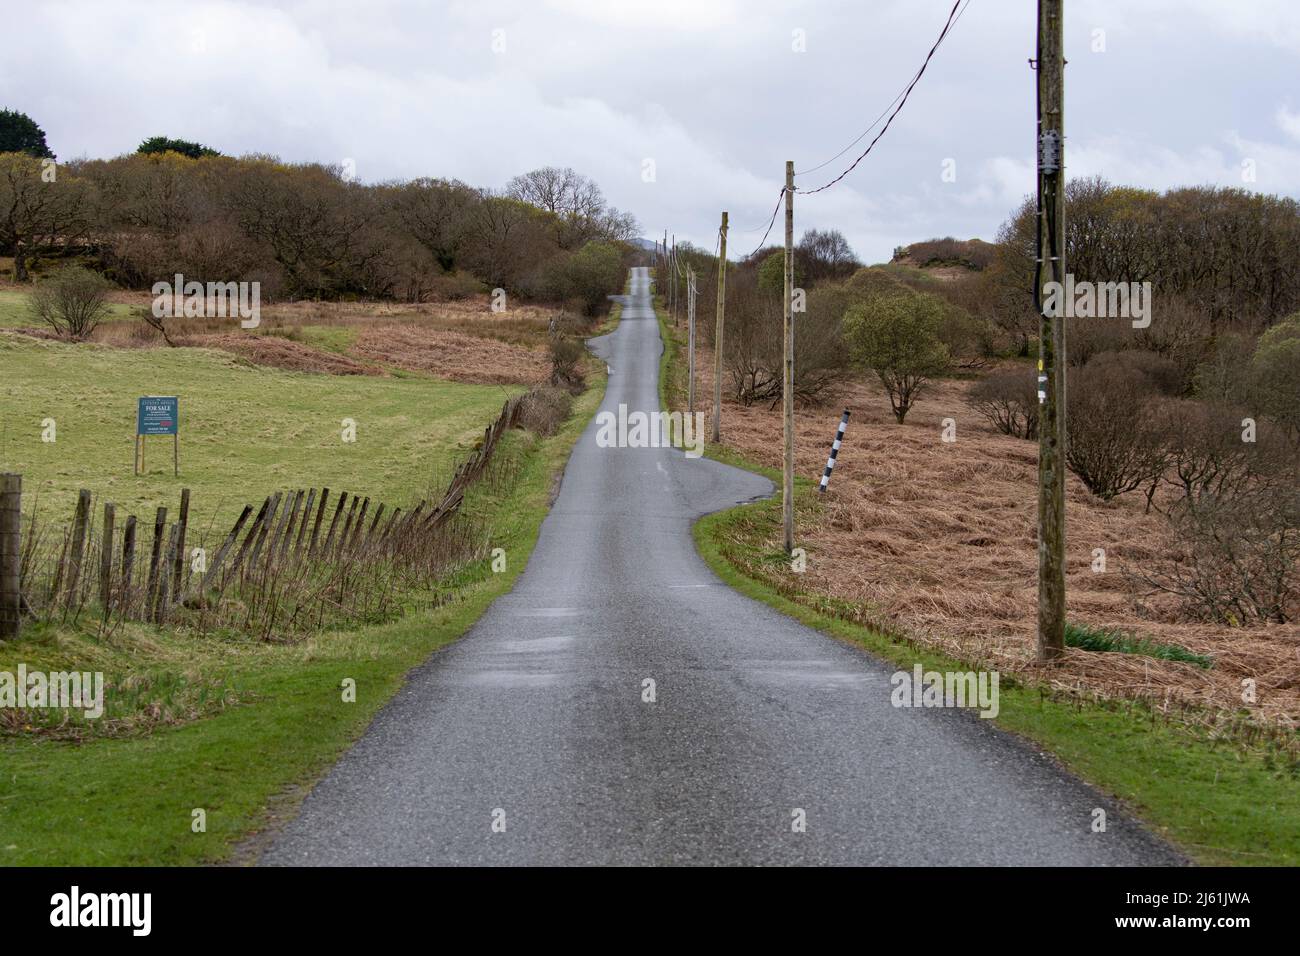 Single track road with passing places typical of those found on the island of Mull a large Scottish Island of the Inner Hebrides Stock Photo